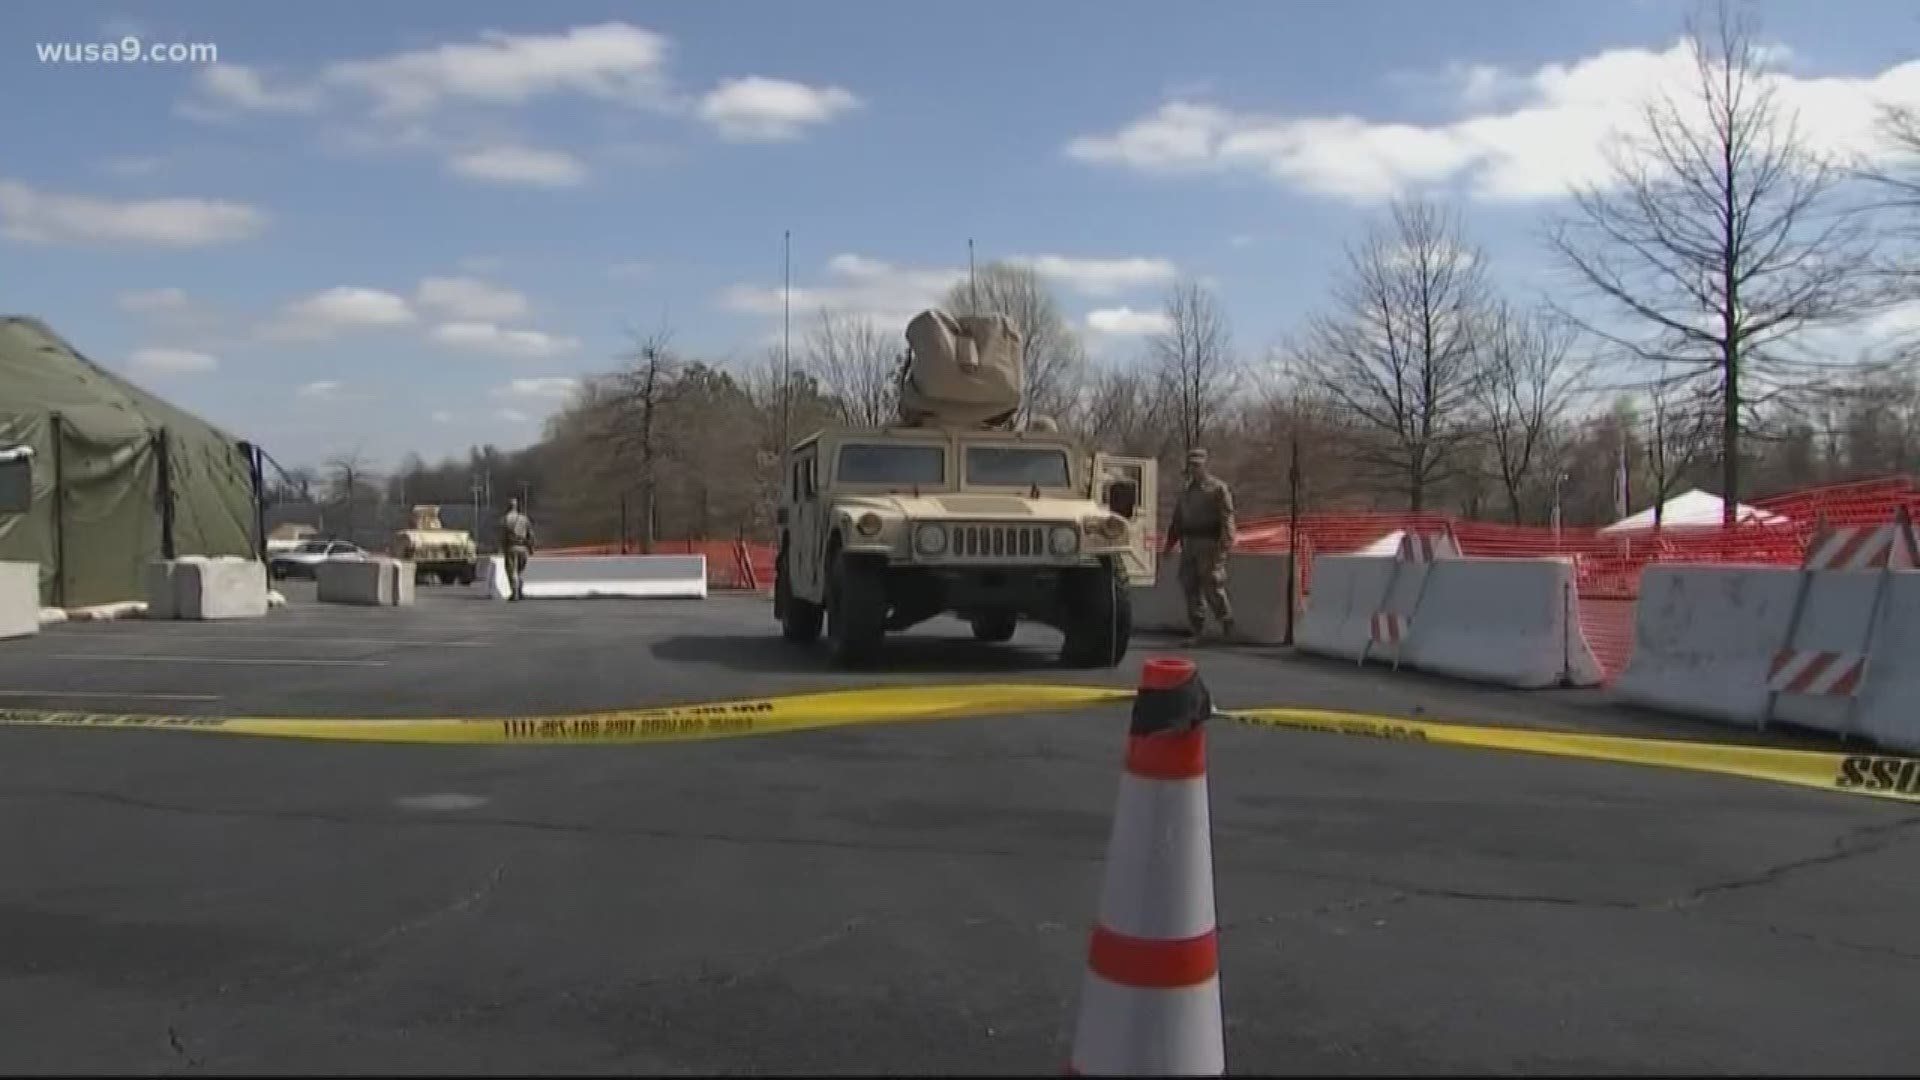 The National Guard has set up 10 tents in the parking lot in Landover.